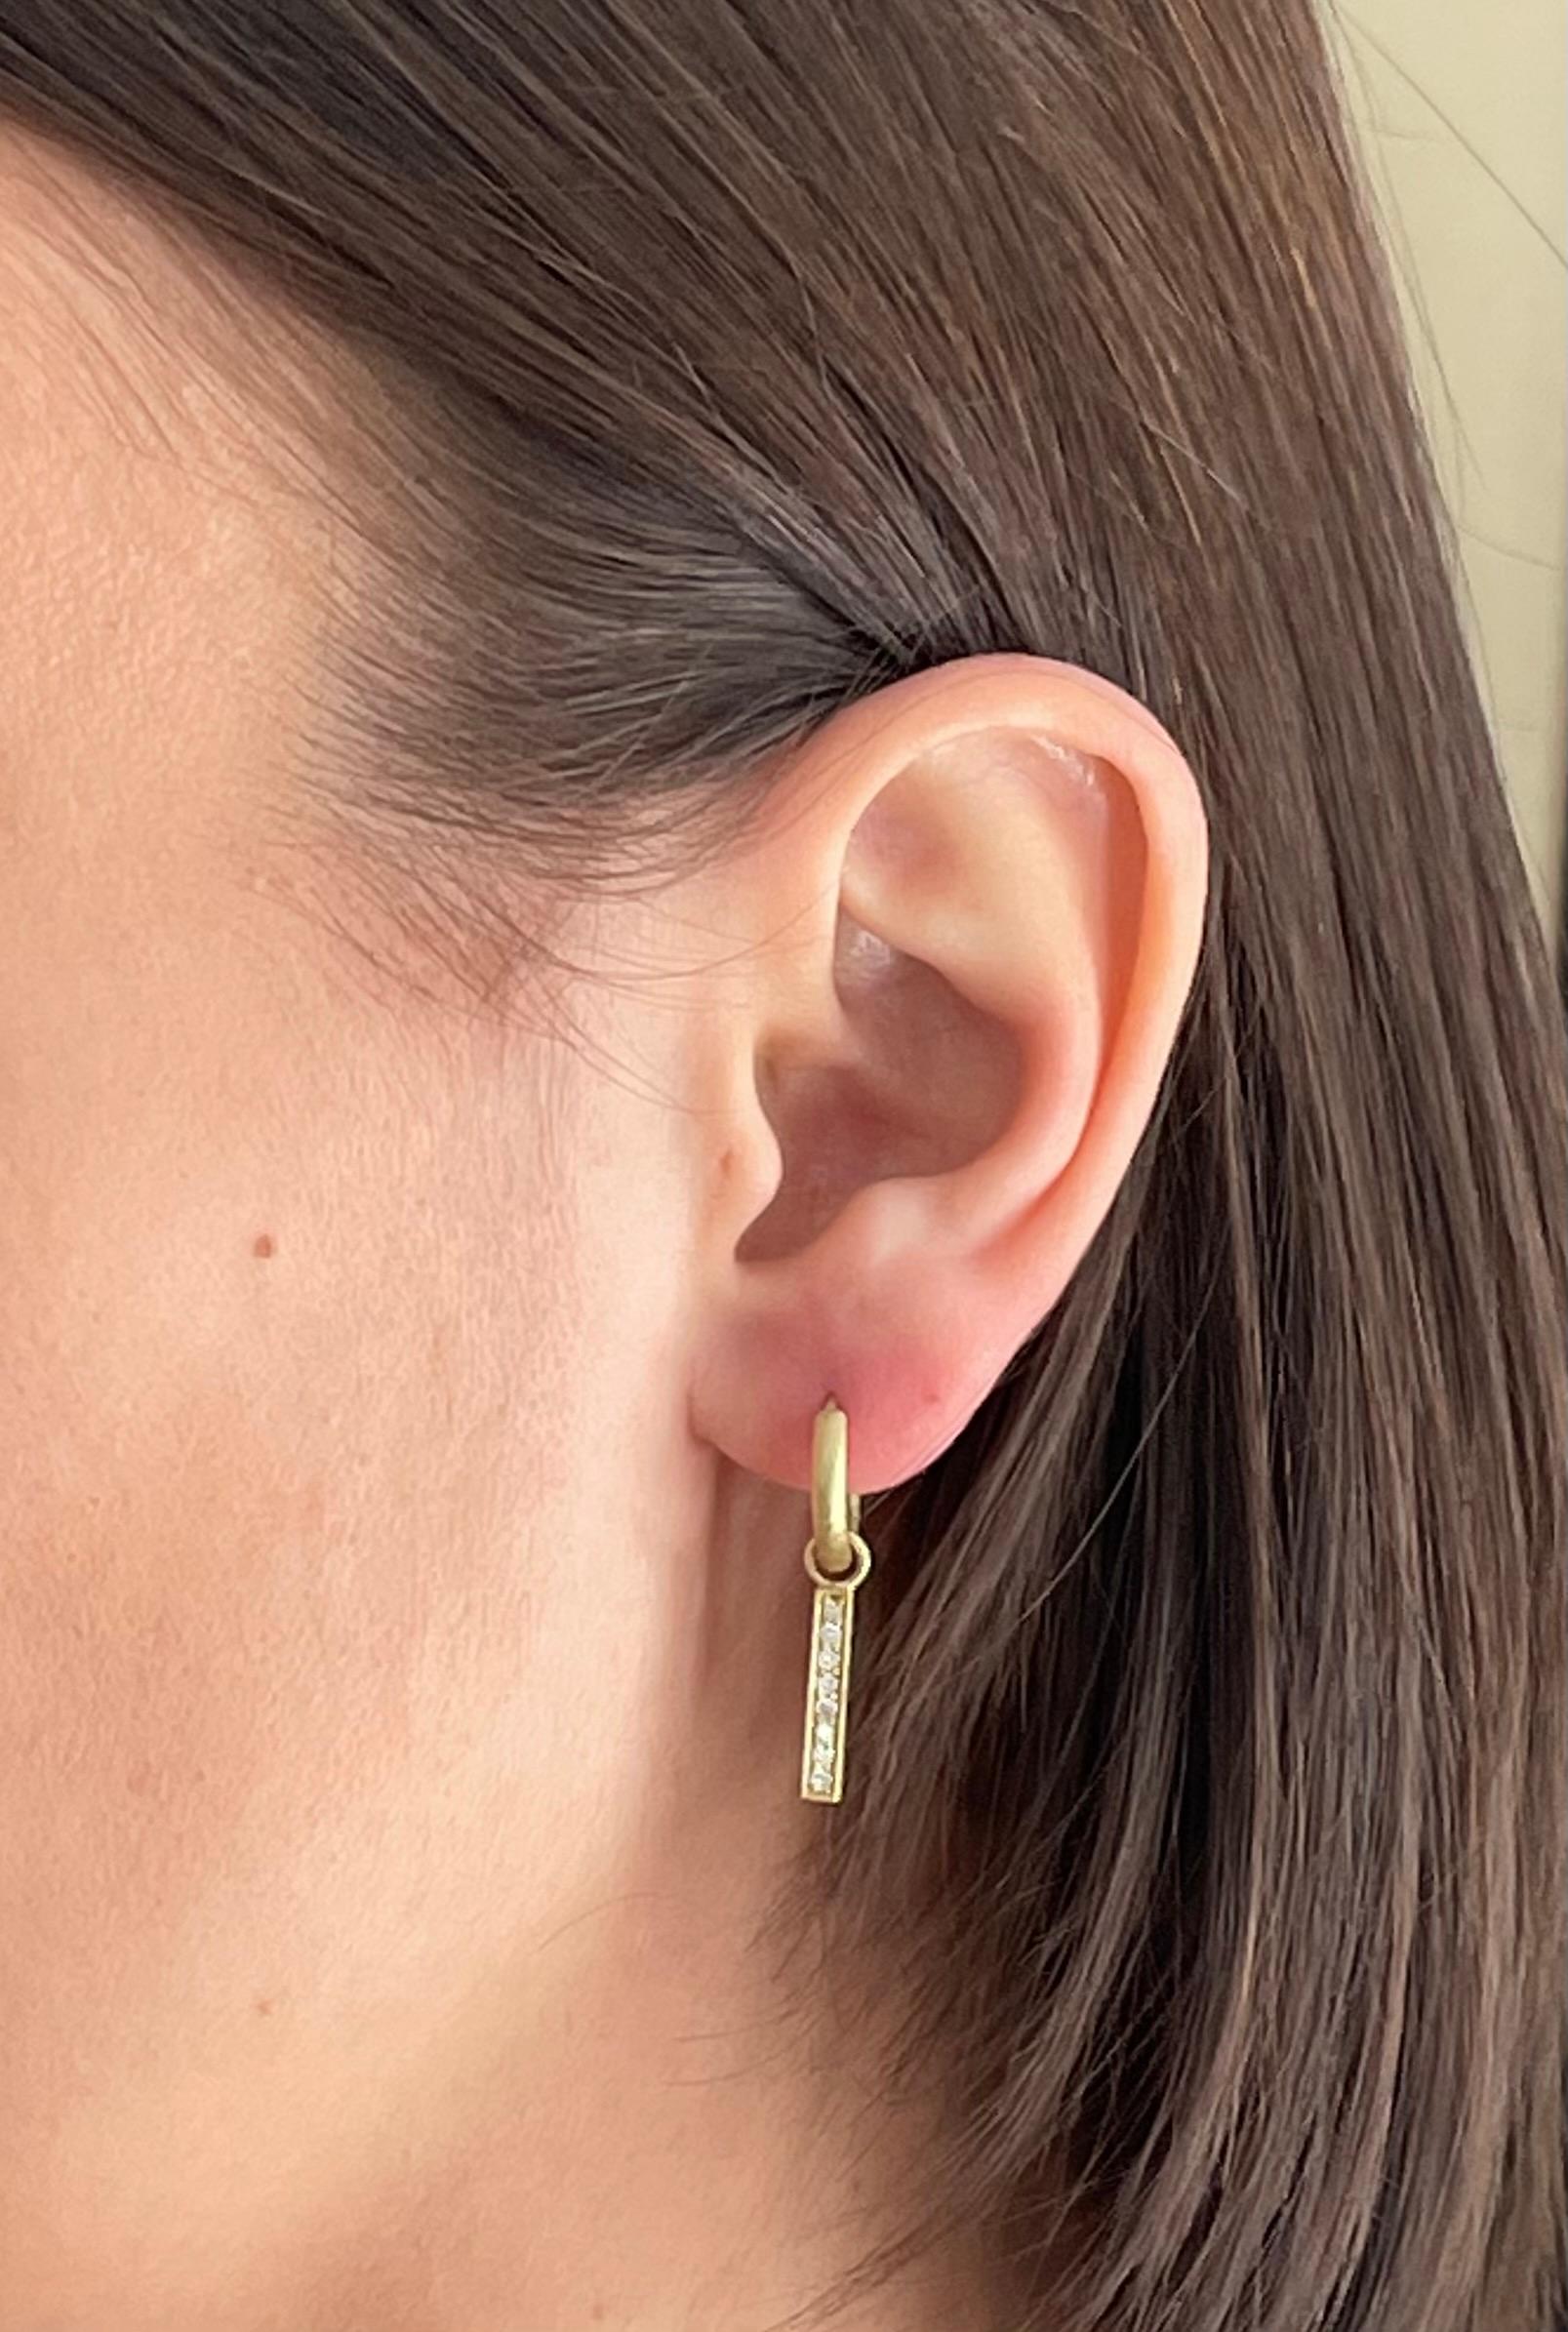 Handcrafted in 18k gold*, Faye Kim’s modern hoop design with diamond micro pave drops convey understated elegance and a truly stylish, everyday look. 

Hoops are solid with a hinged mechanism and matte finish. 2mm thick and 3/8